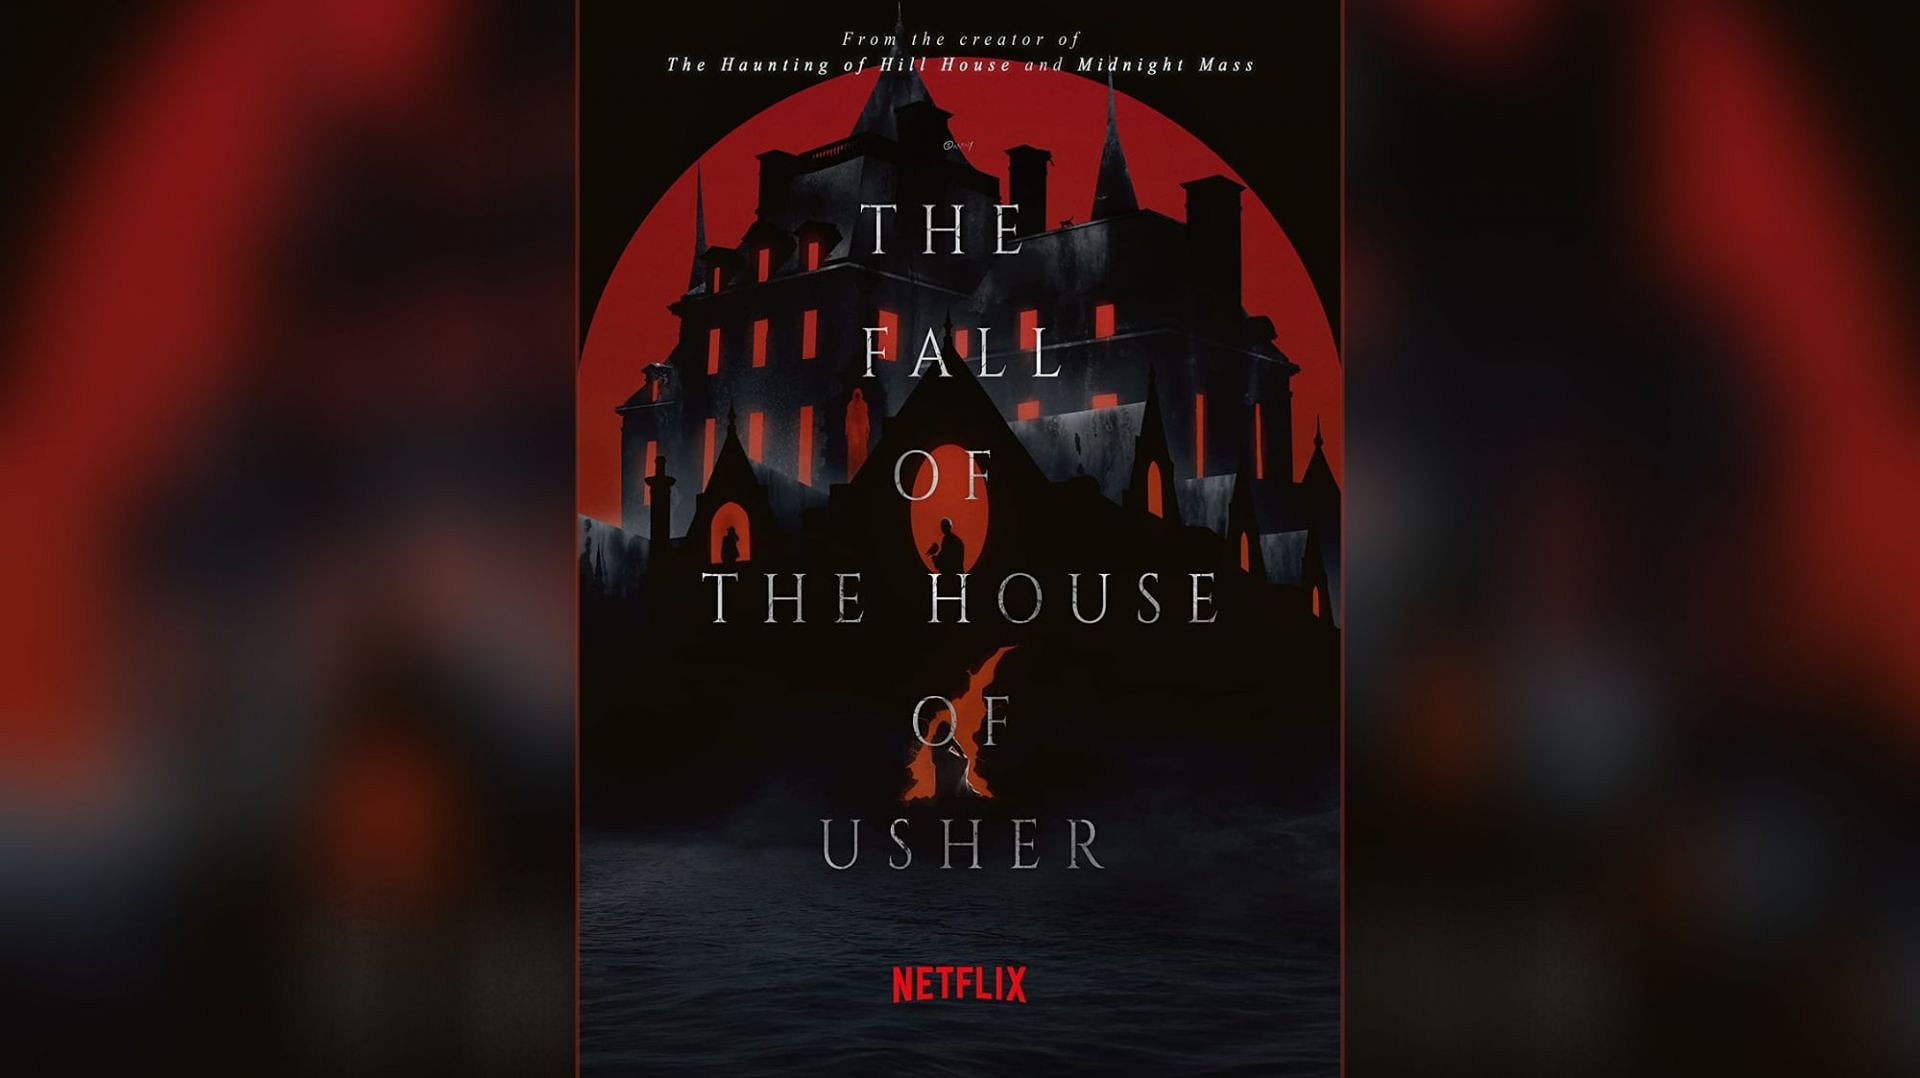 The Fall of the House of the Usher (Image via Netflix)